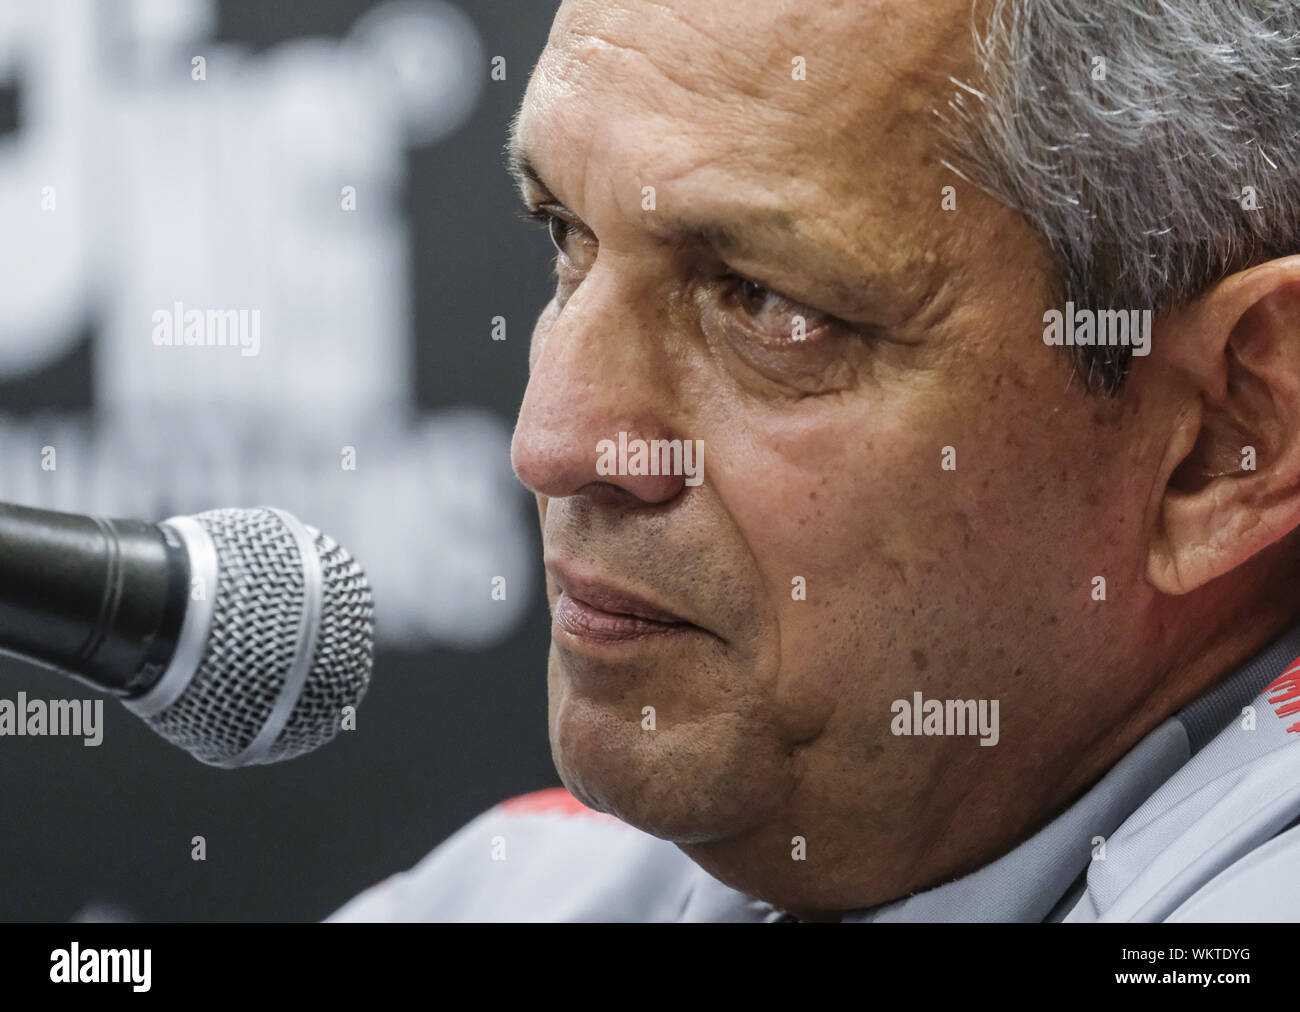 Los Angeles, California, USA. 4th Sep, 2019. Chile's coach Reinaldo Rueda speaks during a press conference in Los Angeles, Wednesday, September 4, 2019. Chile will face Argentina in an International friendly soccer game on September 5 at the Los Angeles Memorial Coliseum. Credit: Ringo Chiu/ZUMA Wire/Alamy Live News Stock Photo